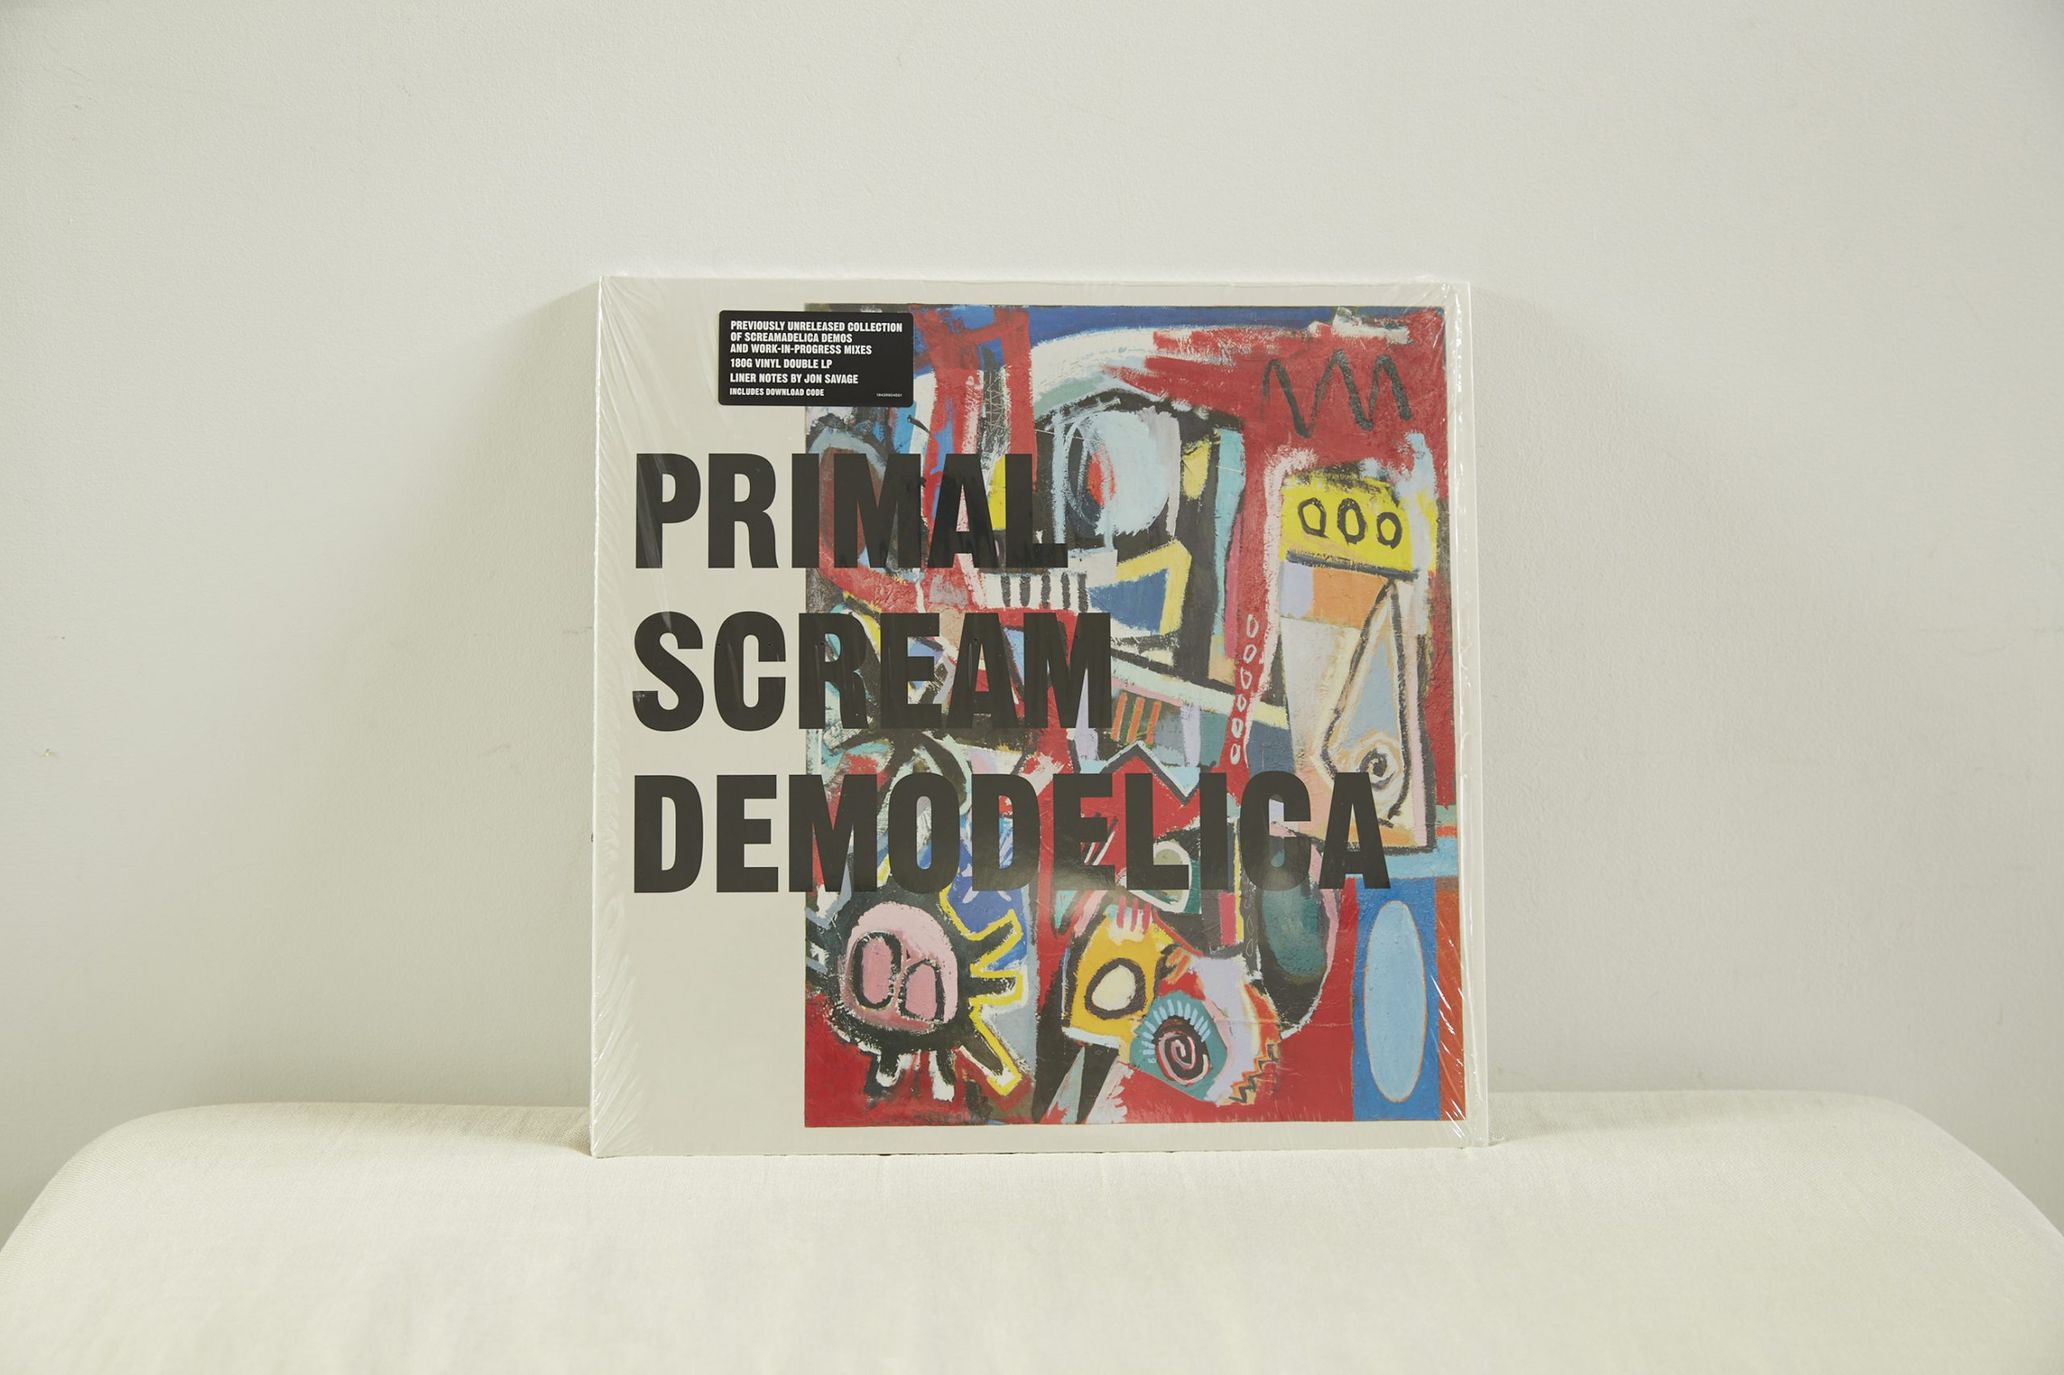 Demodelica was released to commemorate the 30th anniversary of the release of Screamadelica and includes unreleased demos and mixes from the album